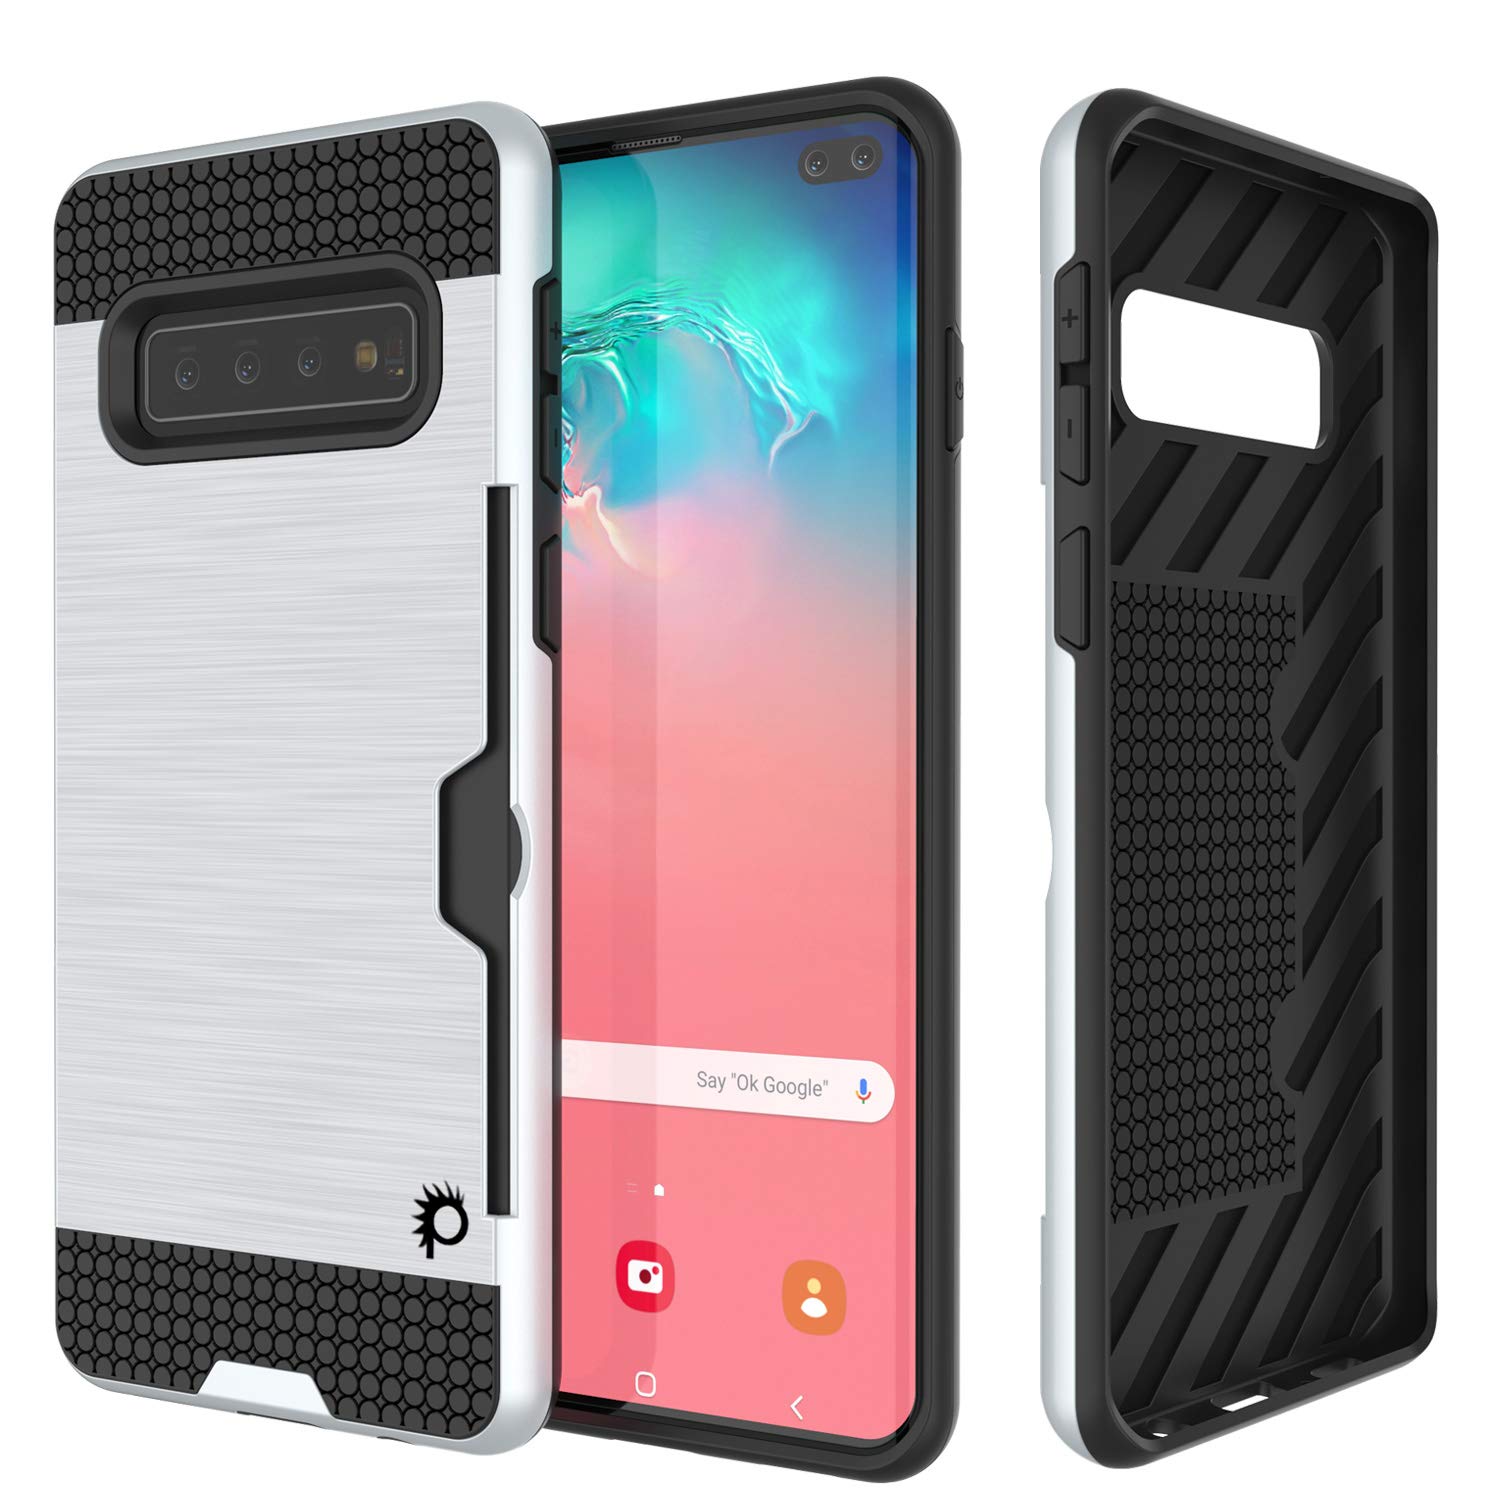 Galaxy S10+ Plus  Case, PUNKcase [SLOT Series] [Slim Fit] Dual-Layer Armor Cover w/Integrated Anti-Shock System, Credit Card Slot & Screen Protector [White]